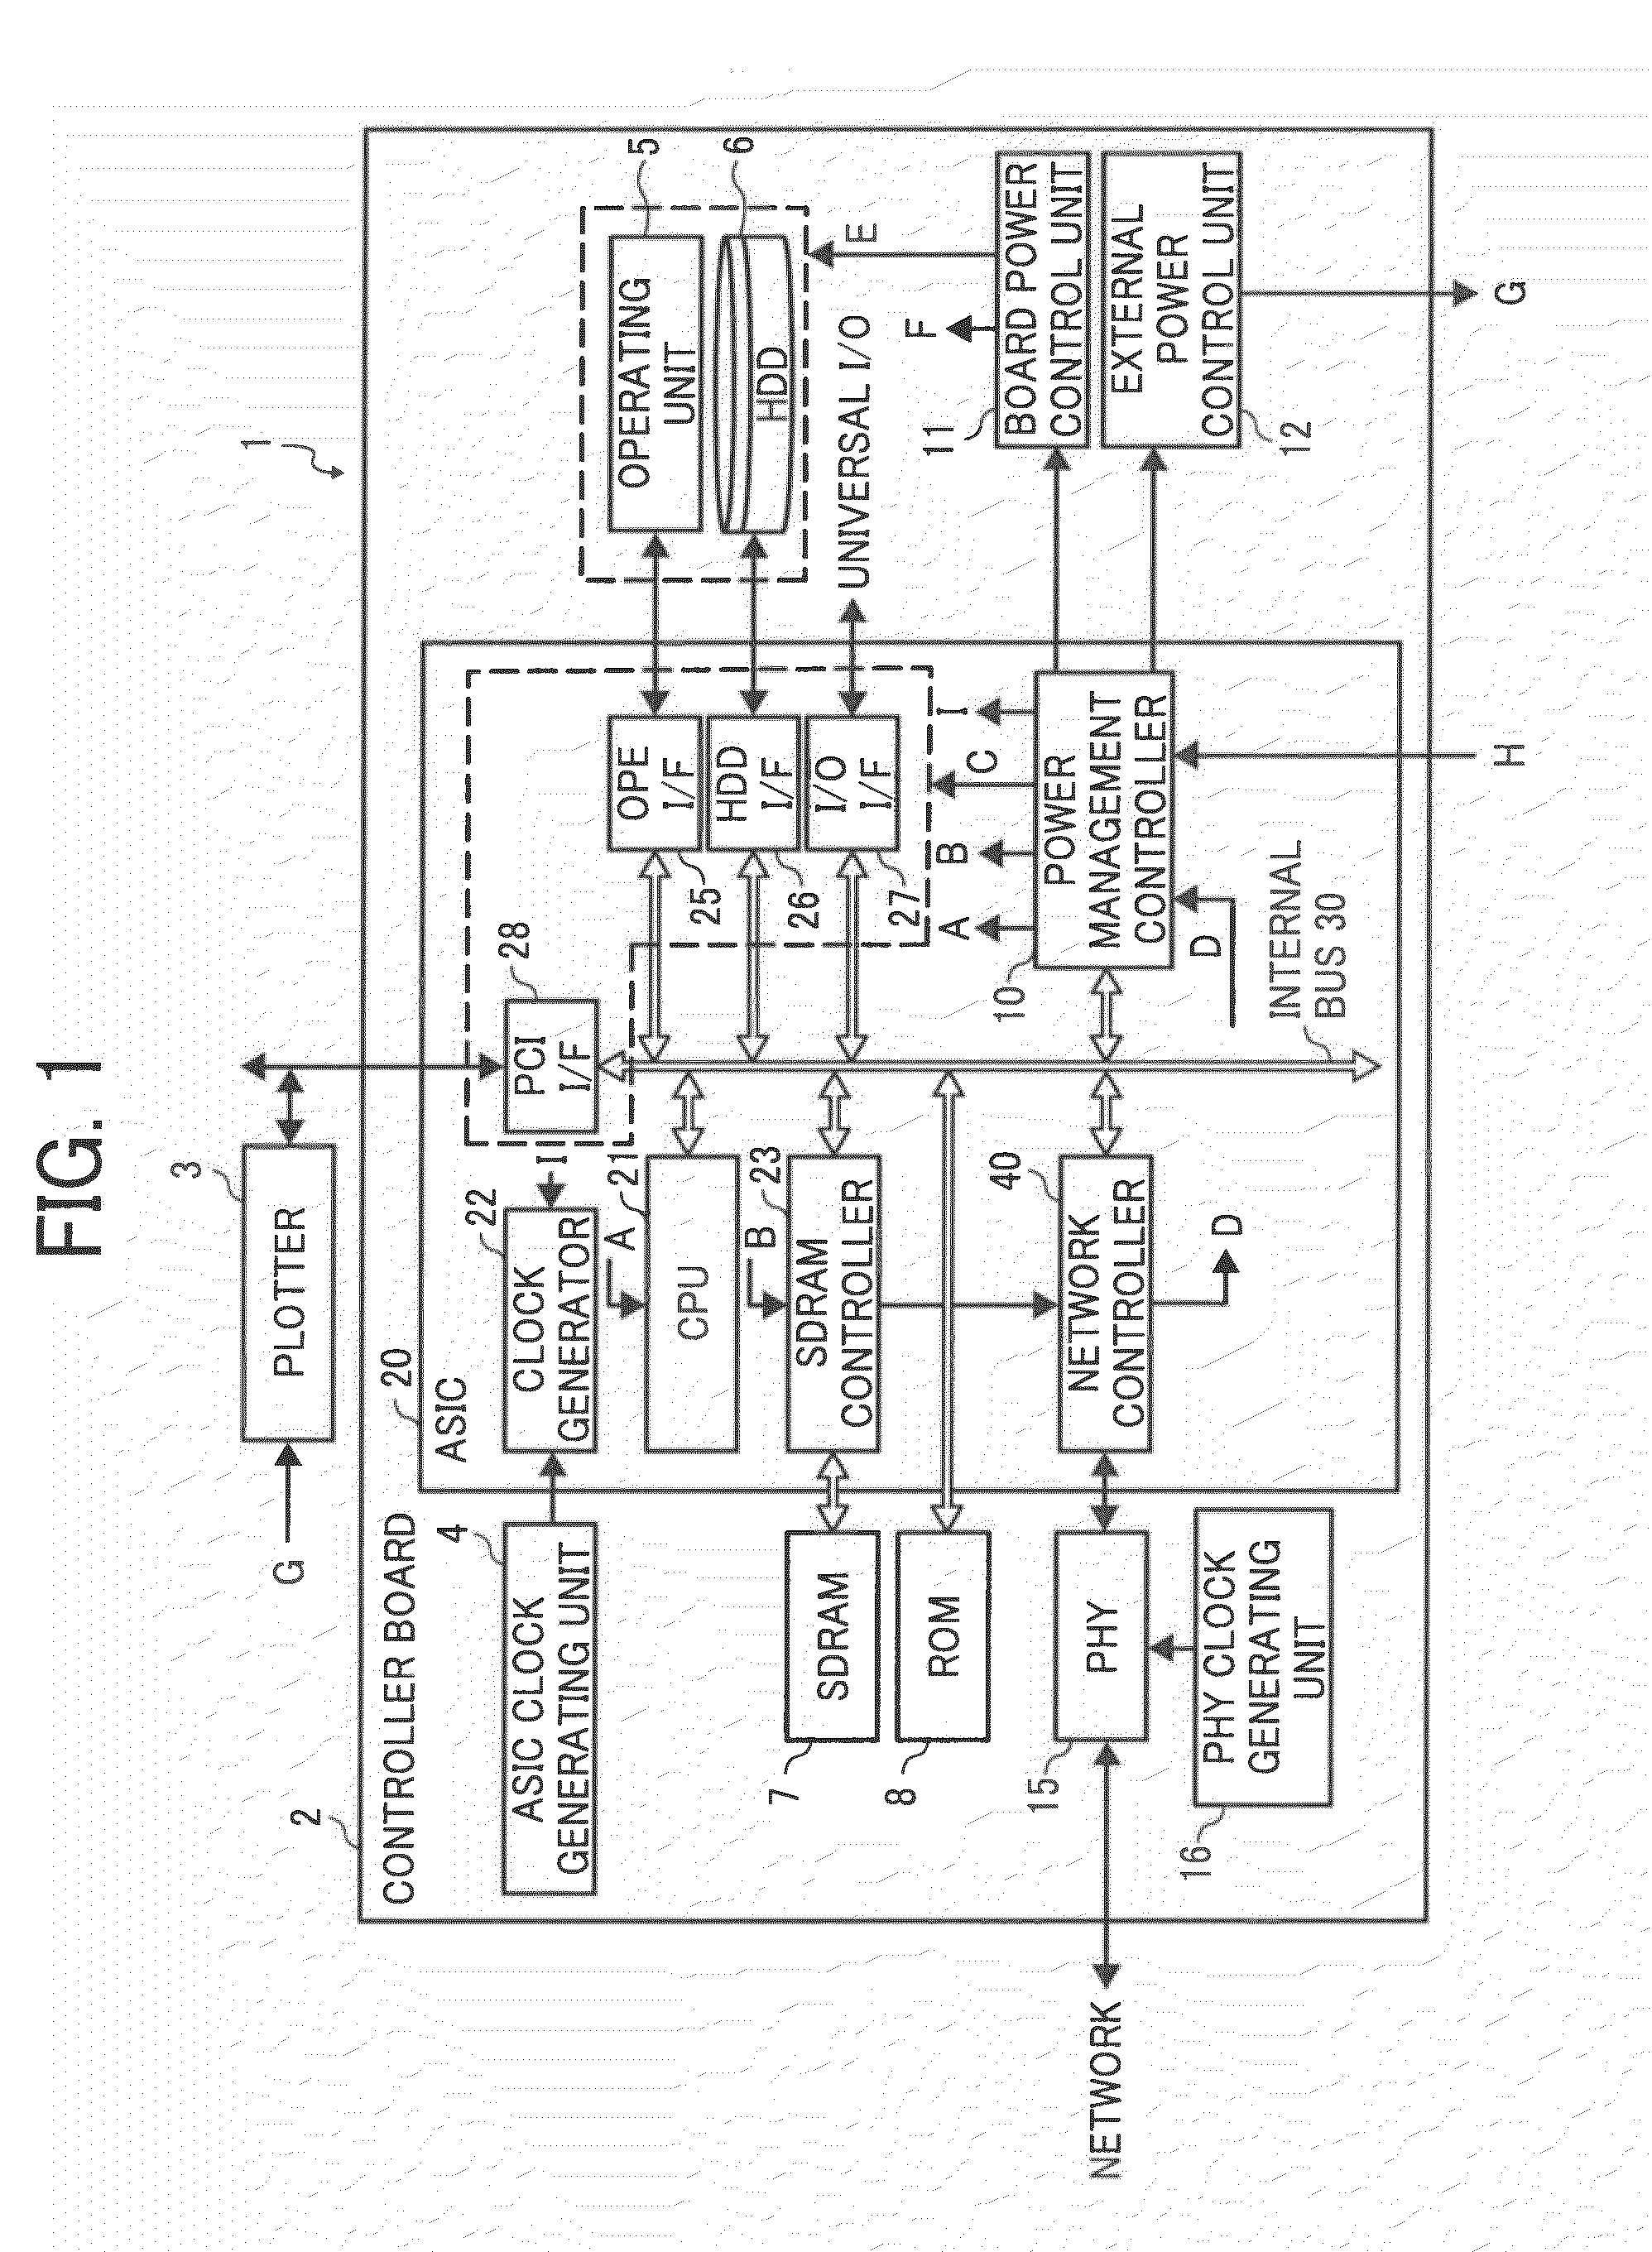 Apparatus, method, and computer program product for processing information